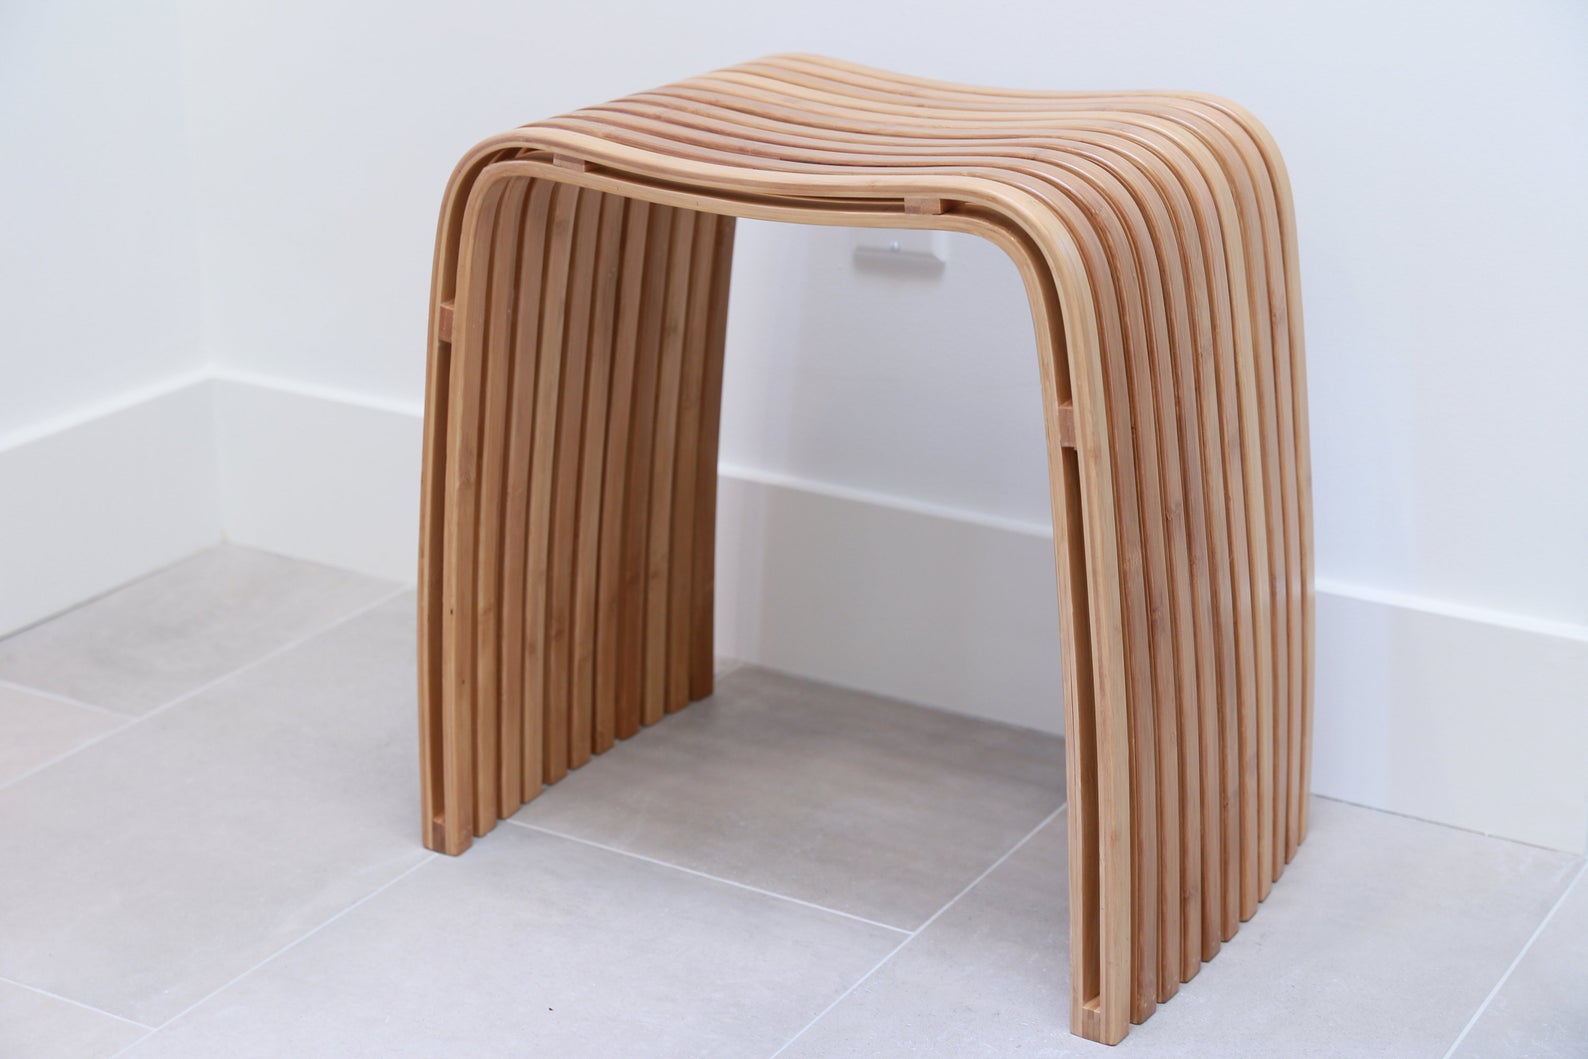 Bamboo-spa-stool-from-Etsy-shop-In-This-Space-54803